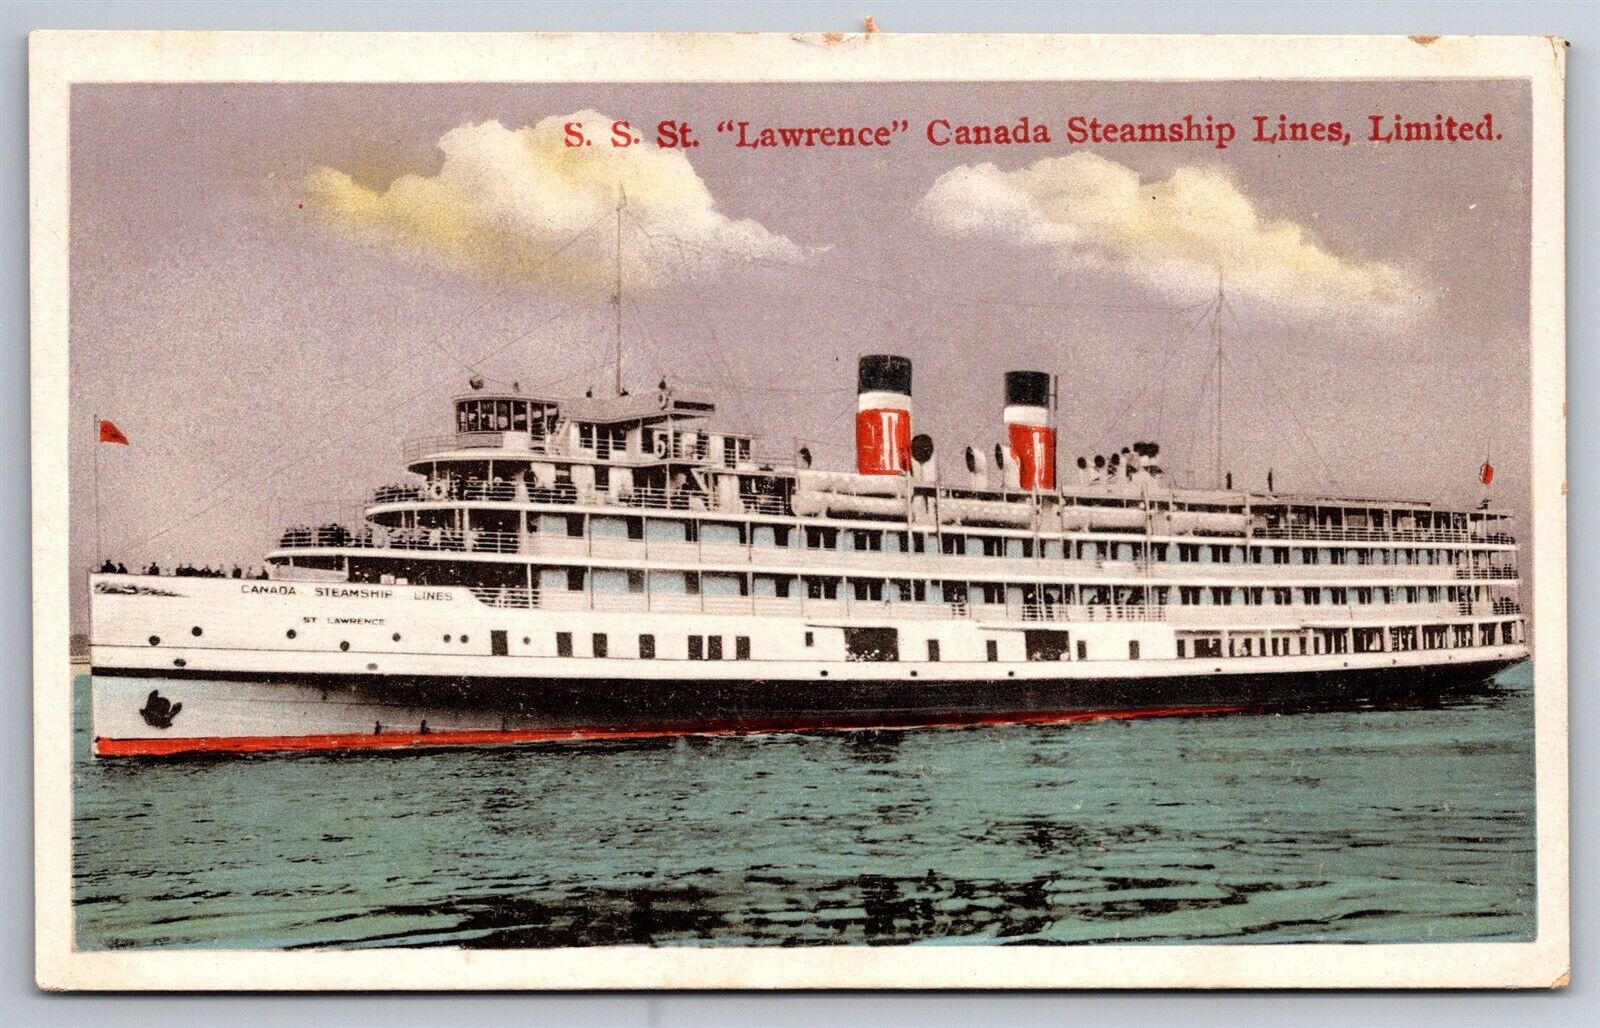 Steamer SS St Lawrence Canada Steamship Lines C1915 Postcard G2